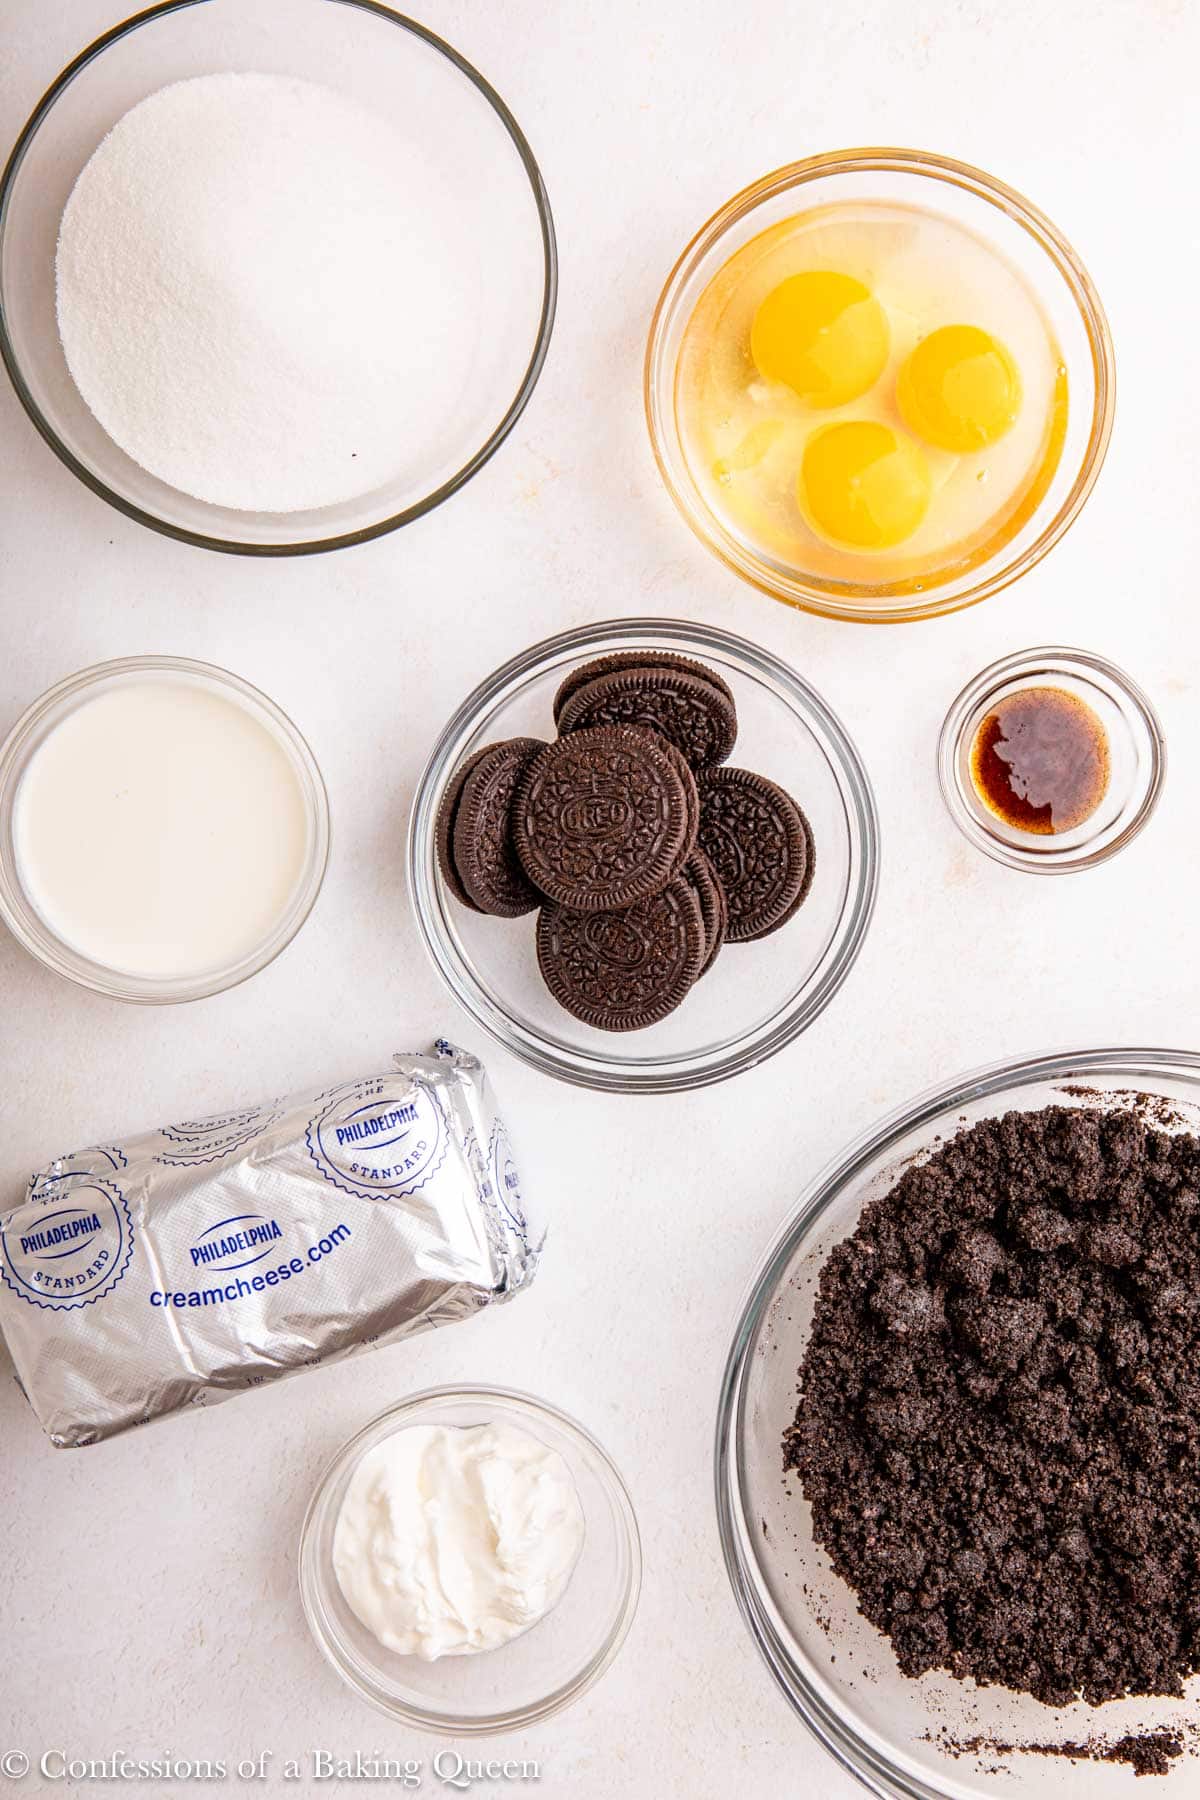 ingredients for mini oreo cheesecakes in small bowls on a light surface